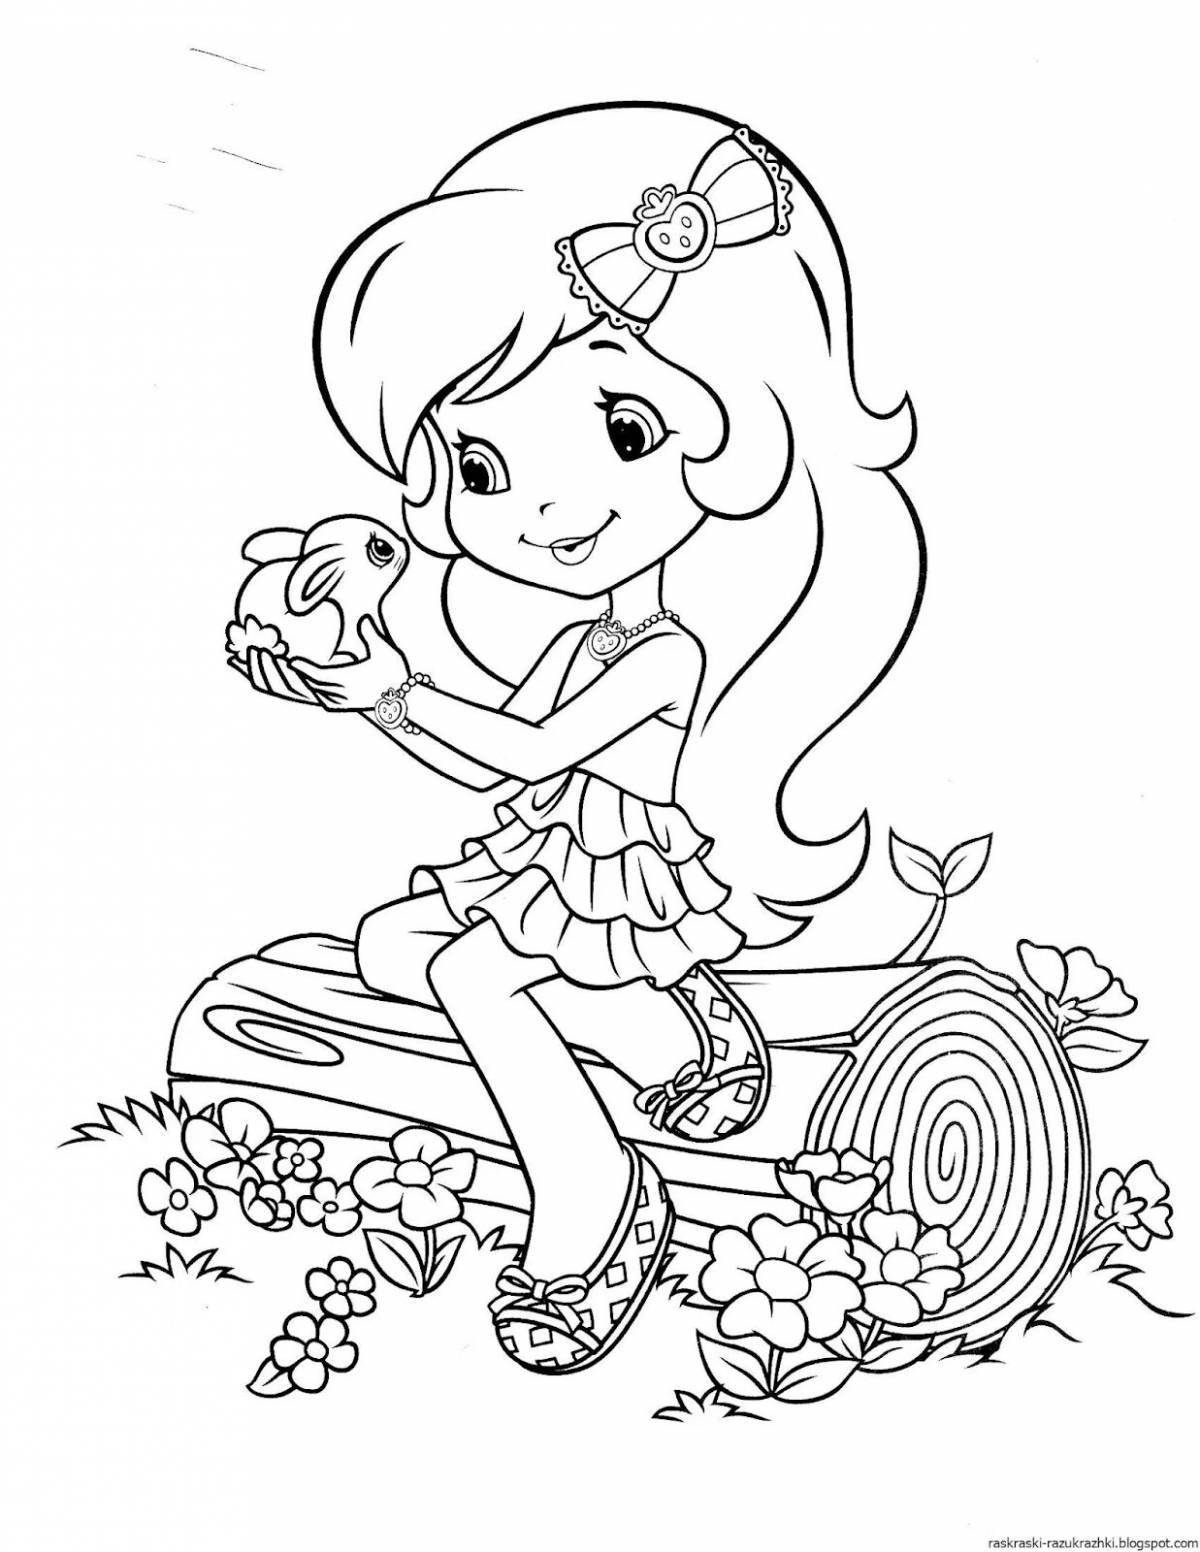 Delightful coloring book for girls 4-5 years old